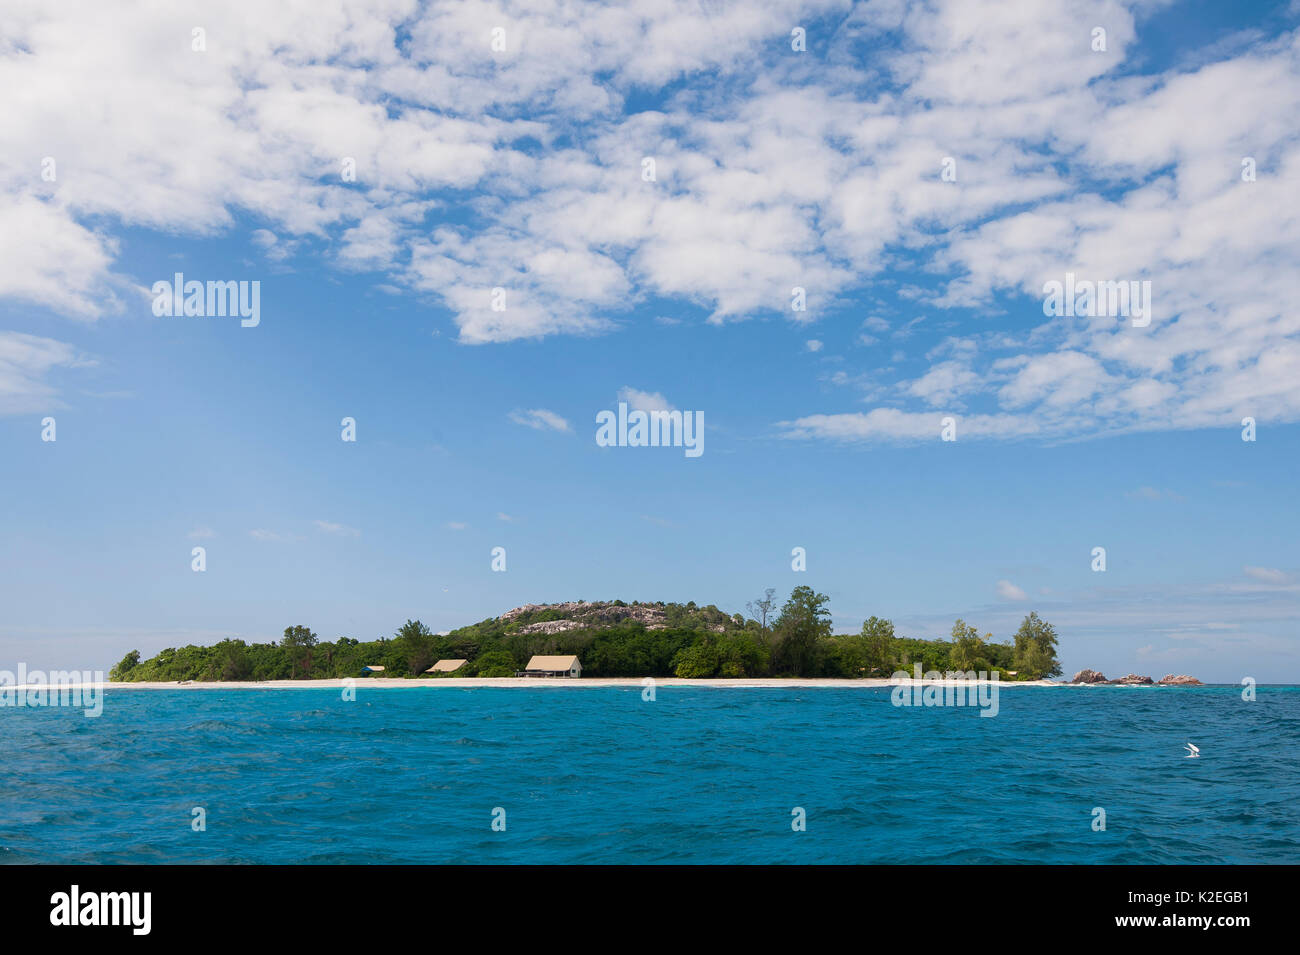 Cousin Island Nature Reserve, one of the few remaining rat-free islands of the inner Seychelles, off the south-west coast of Praslin Island, Republic of Seychelles Stock Photo